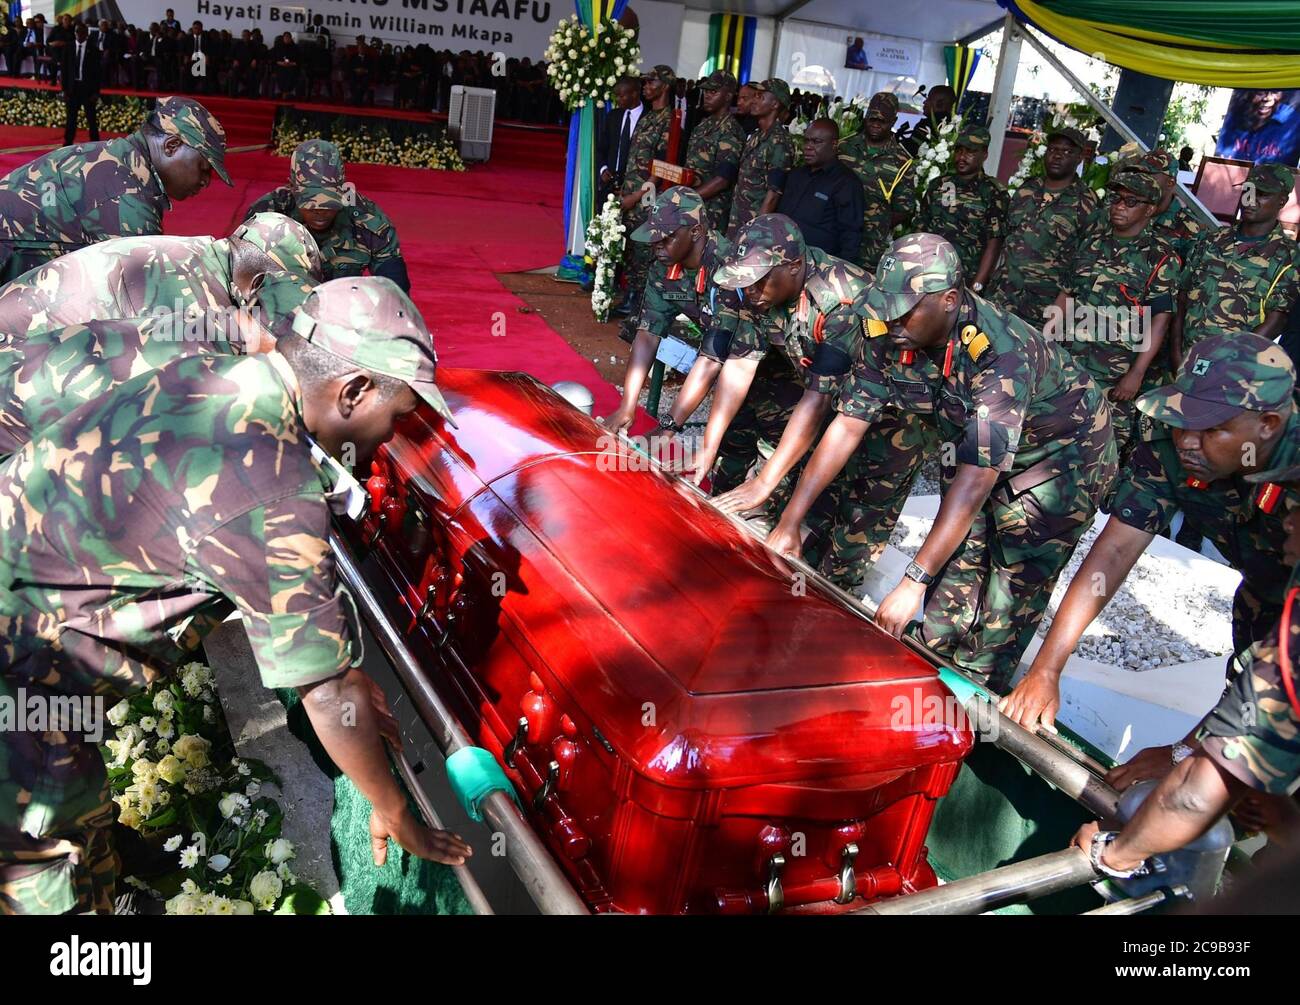 Dar Es Salaam, Tanzania. 29th July 2020. Photo taken on July 29, 2020 shows the burial ceremony of former Tanzanian President Benjamin Mkapa in Lupaso village, Masasi district of Mtwara, Tanzania. Former Tanzanian President Benjamin Mkapa was buried on Wednesday in his native village of Lupaso in Masasi district in the country's southern region of Mtwara. Mkapa died on July 24, 2020 at the age of 81 in a hospital in Dar es Salaam. (Tanzanian State House/Handout via Xinhua) Credit: Xinhua/Alamy Live News Stock Photo